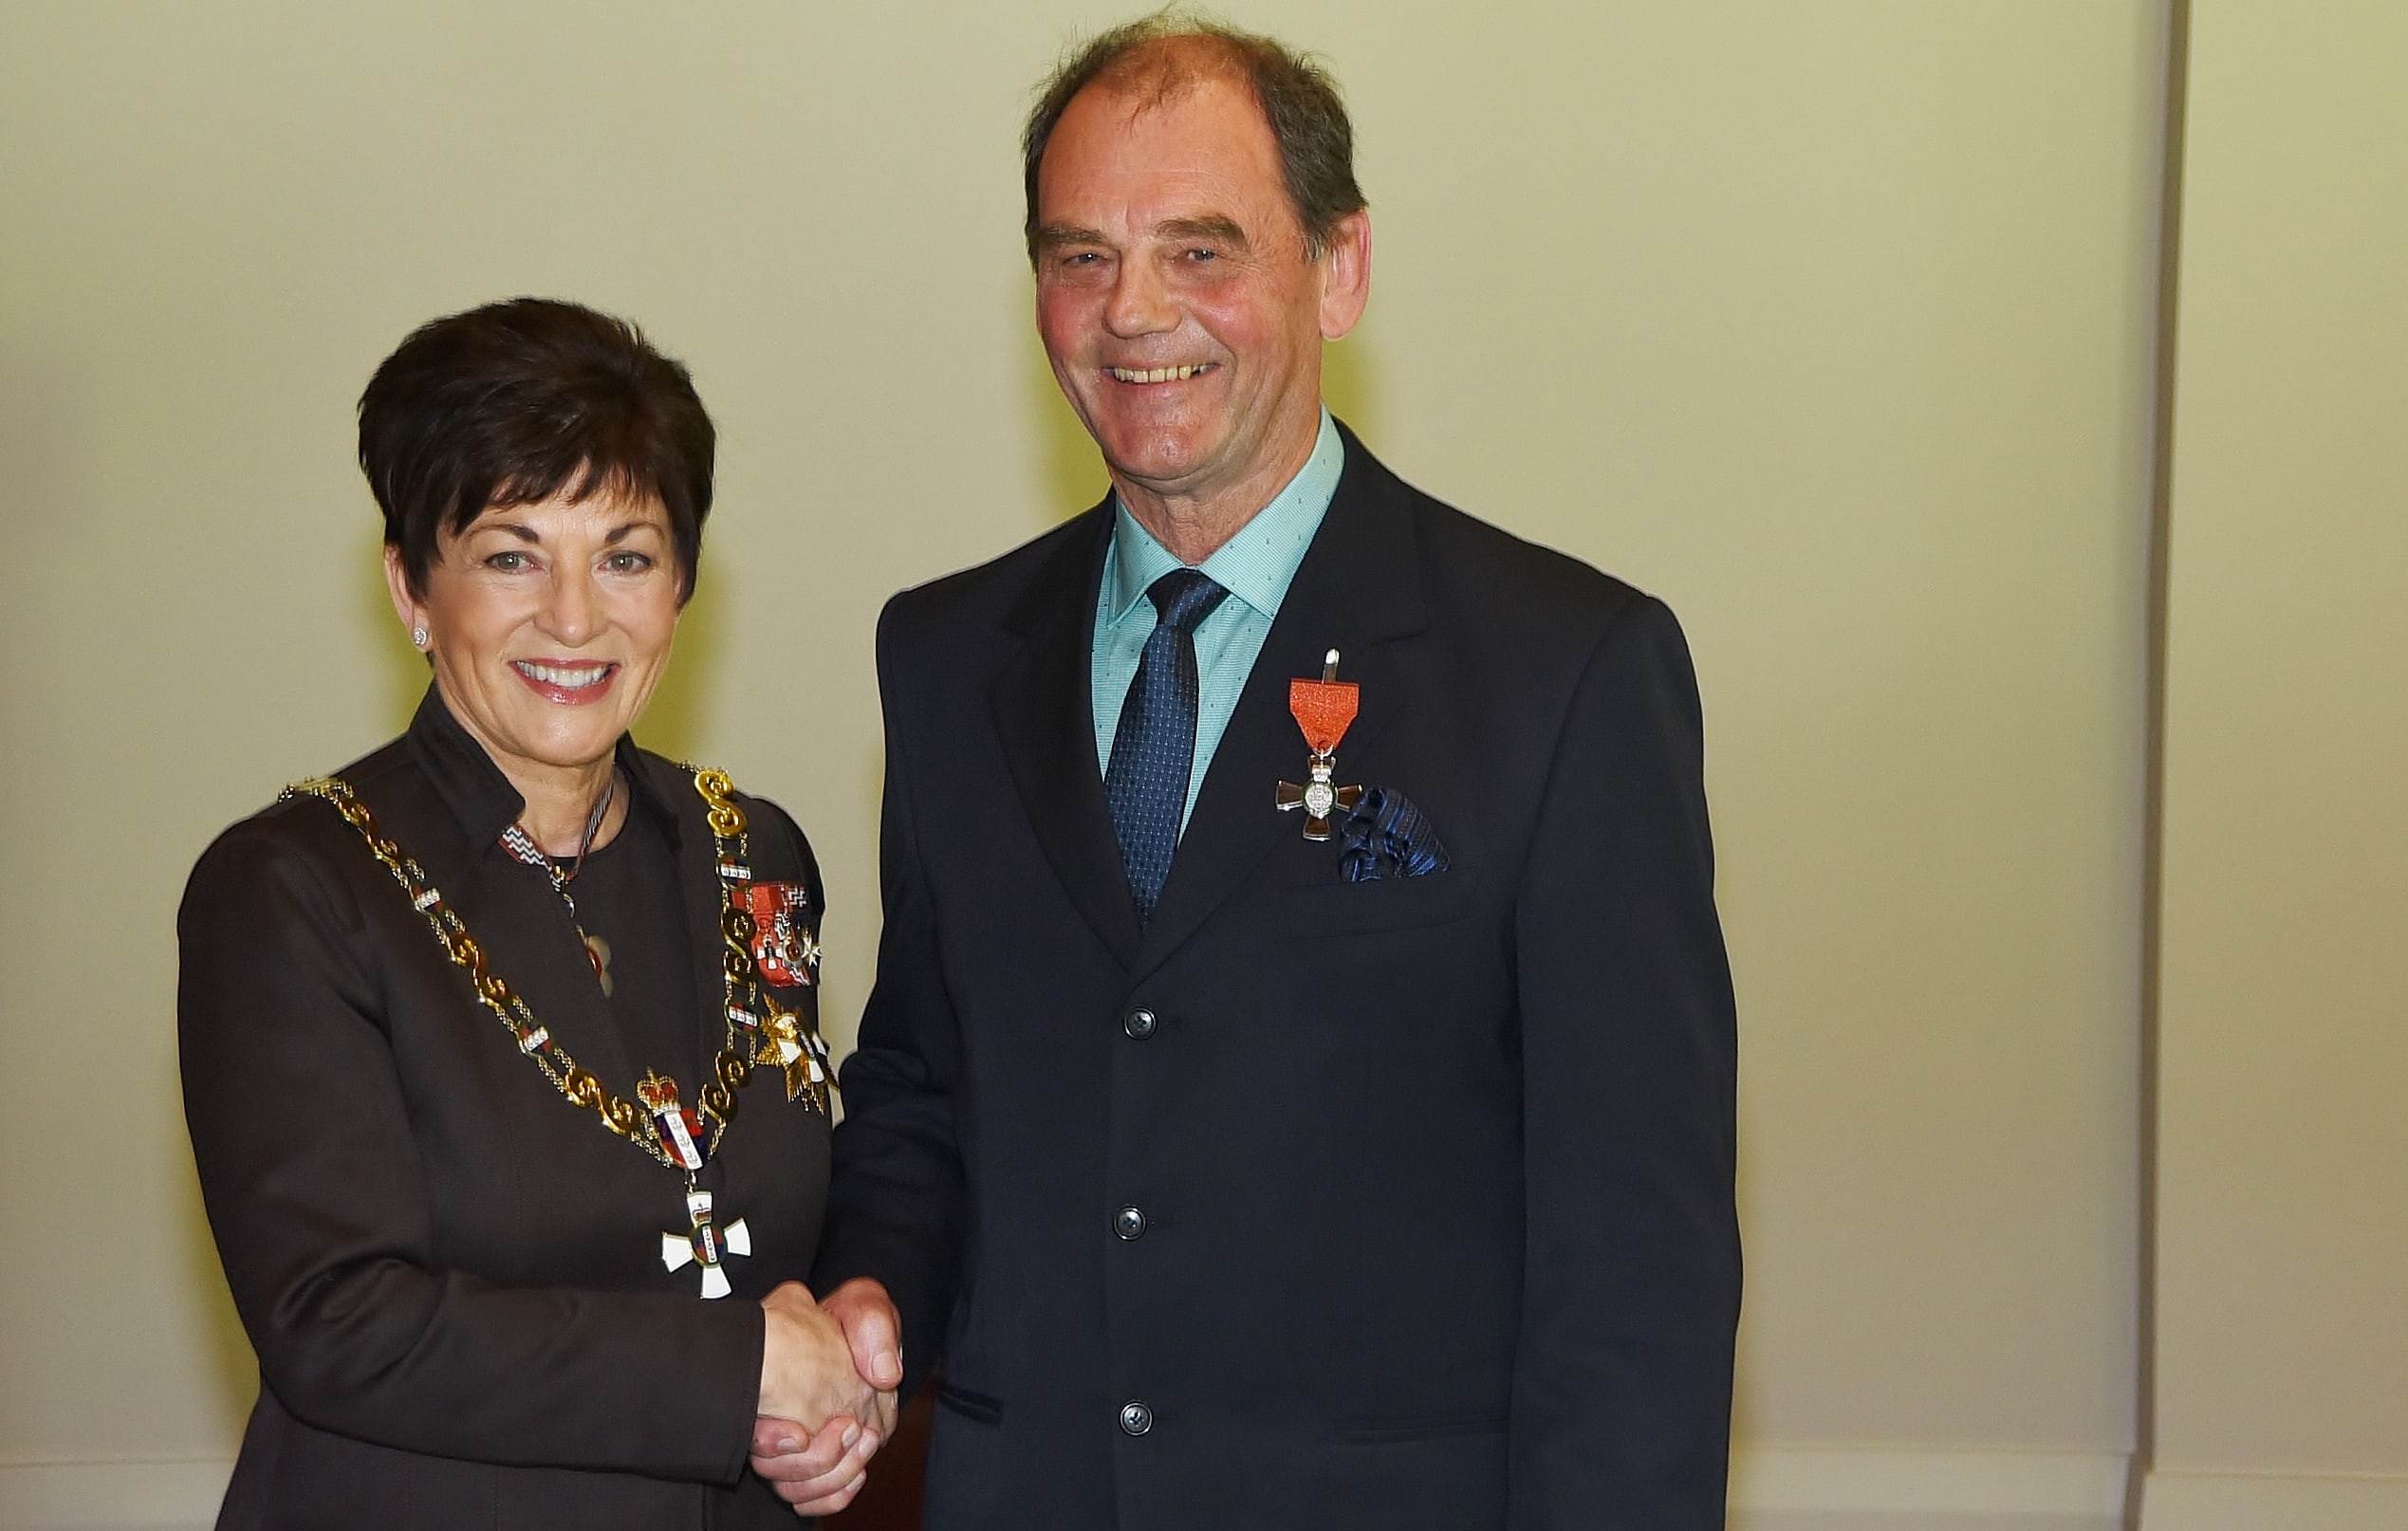 John Ure receiving his MNZM for services to music from Dame Patsy Reddy in 2016